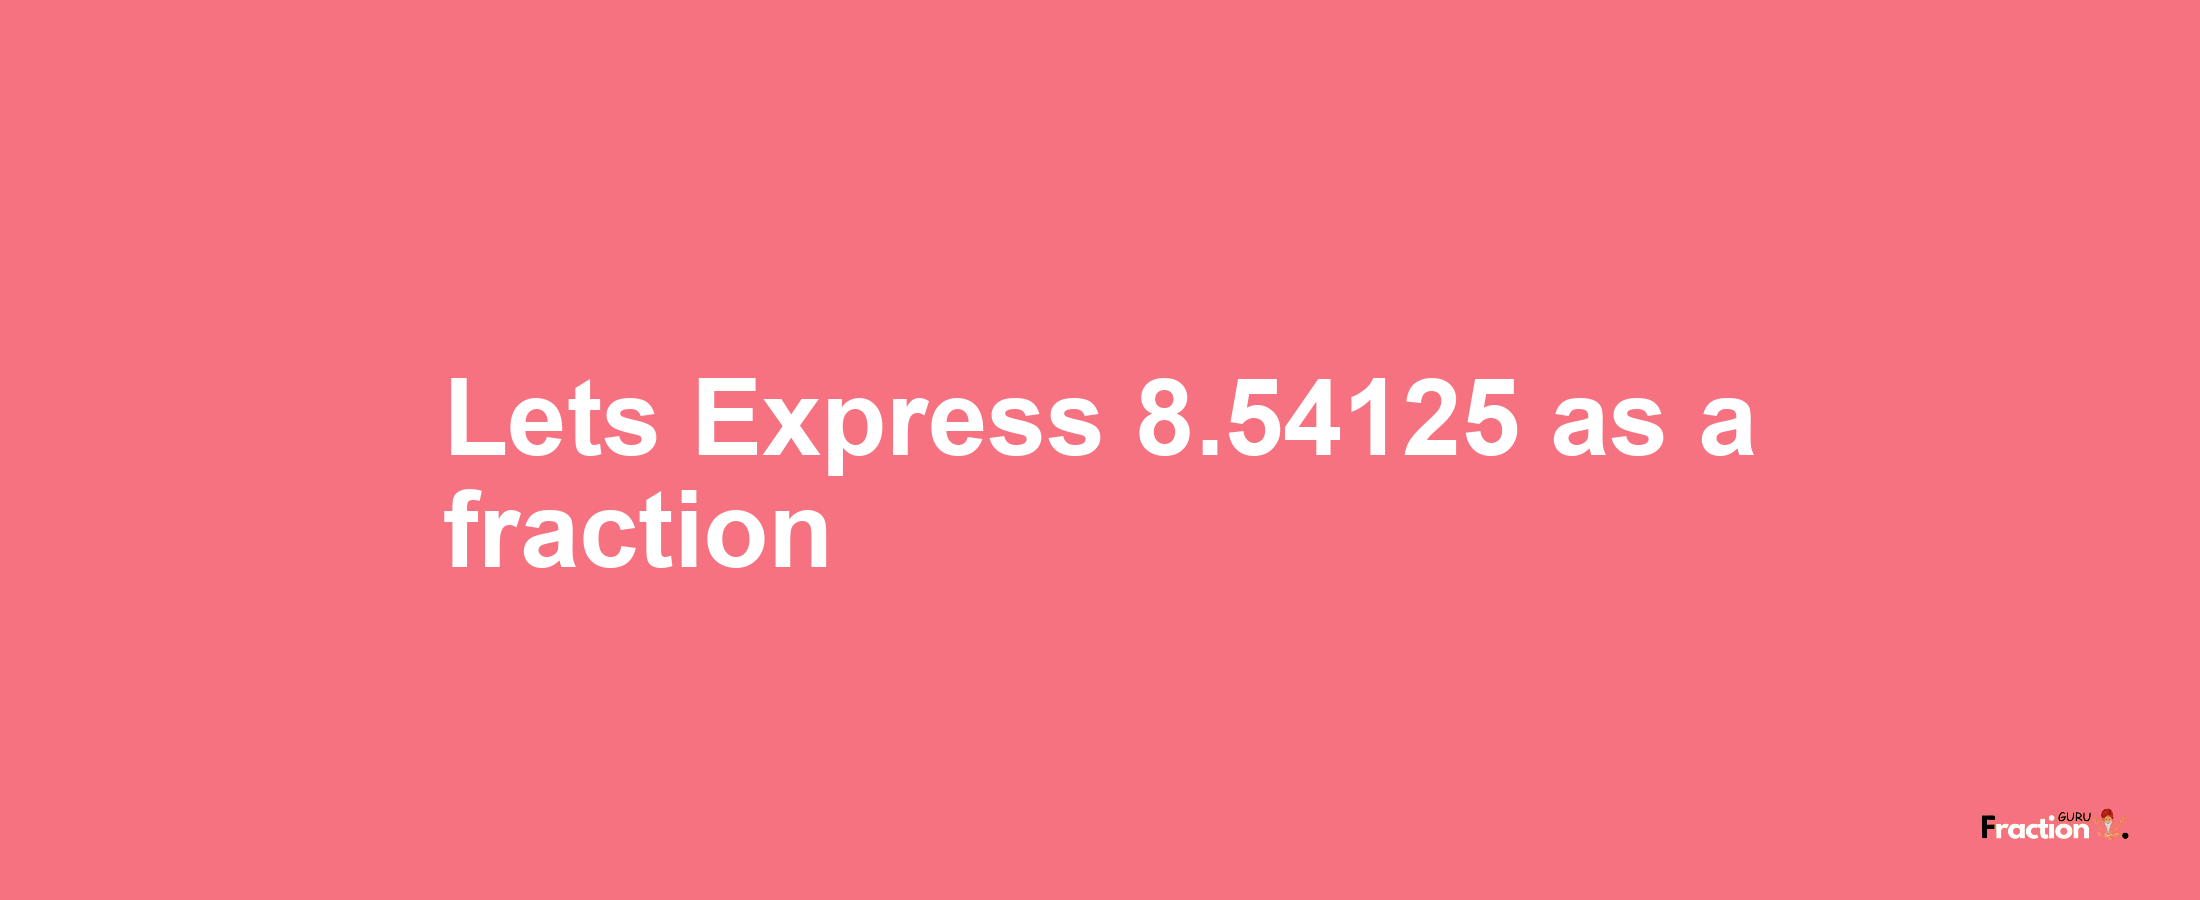 Lets Express 8.54125 as afraction